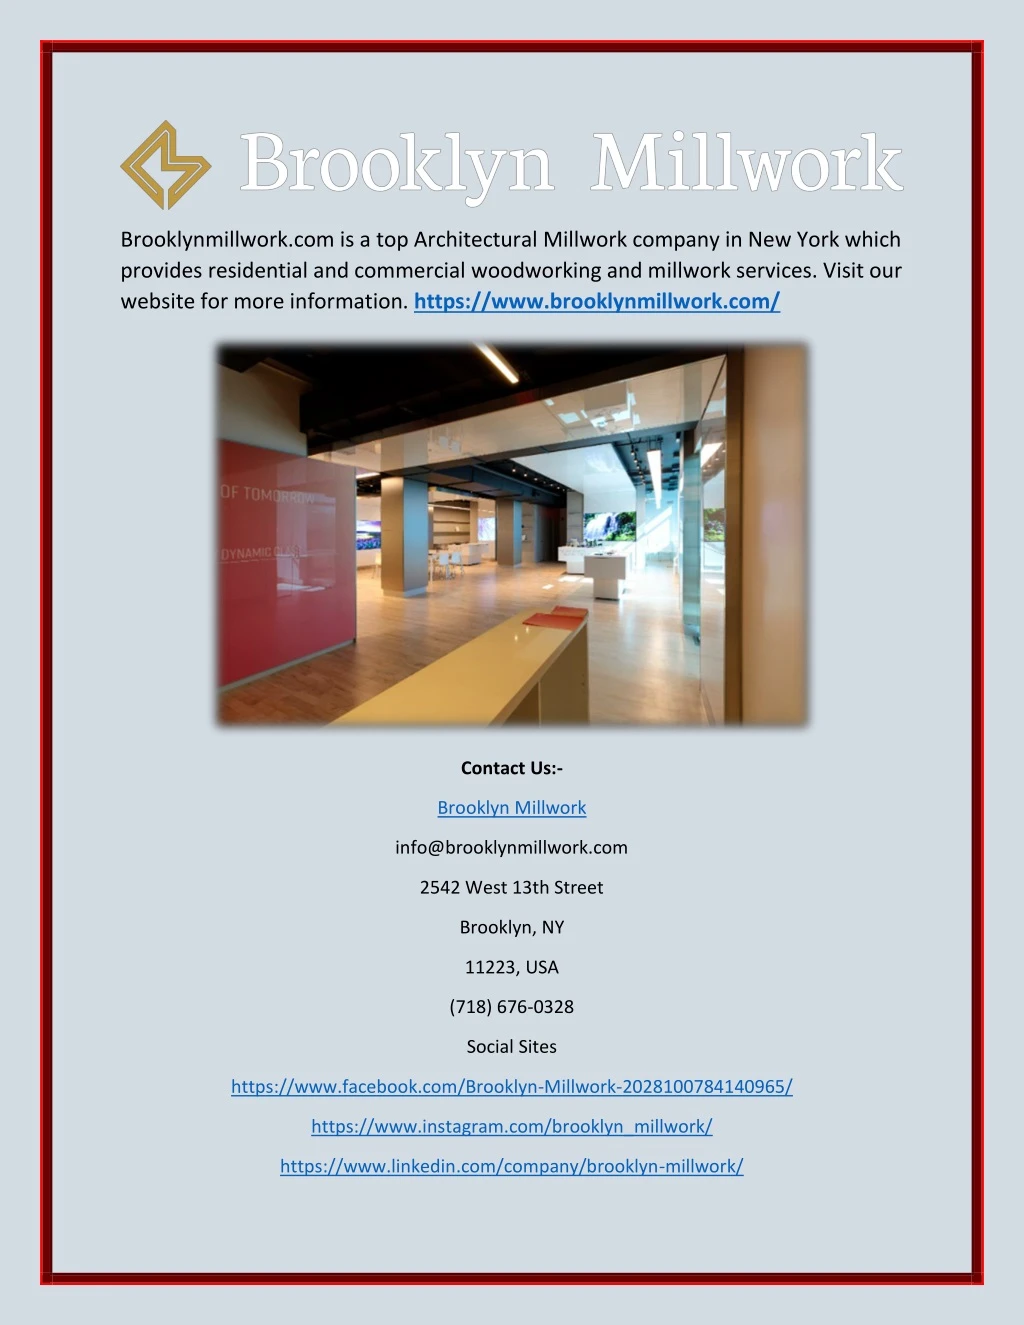 brooklynmillwork com is a top architectural